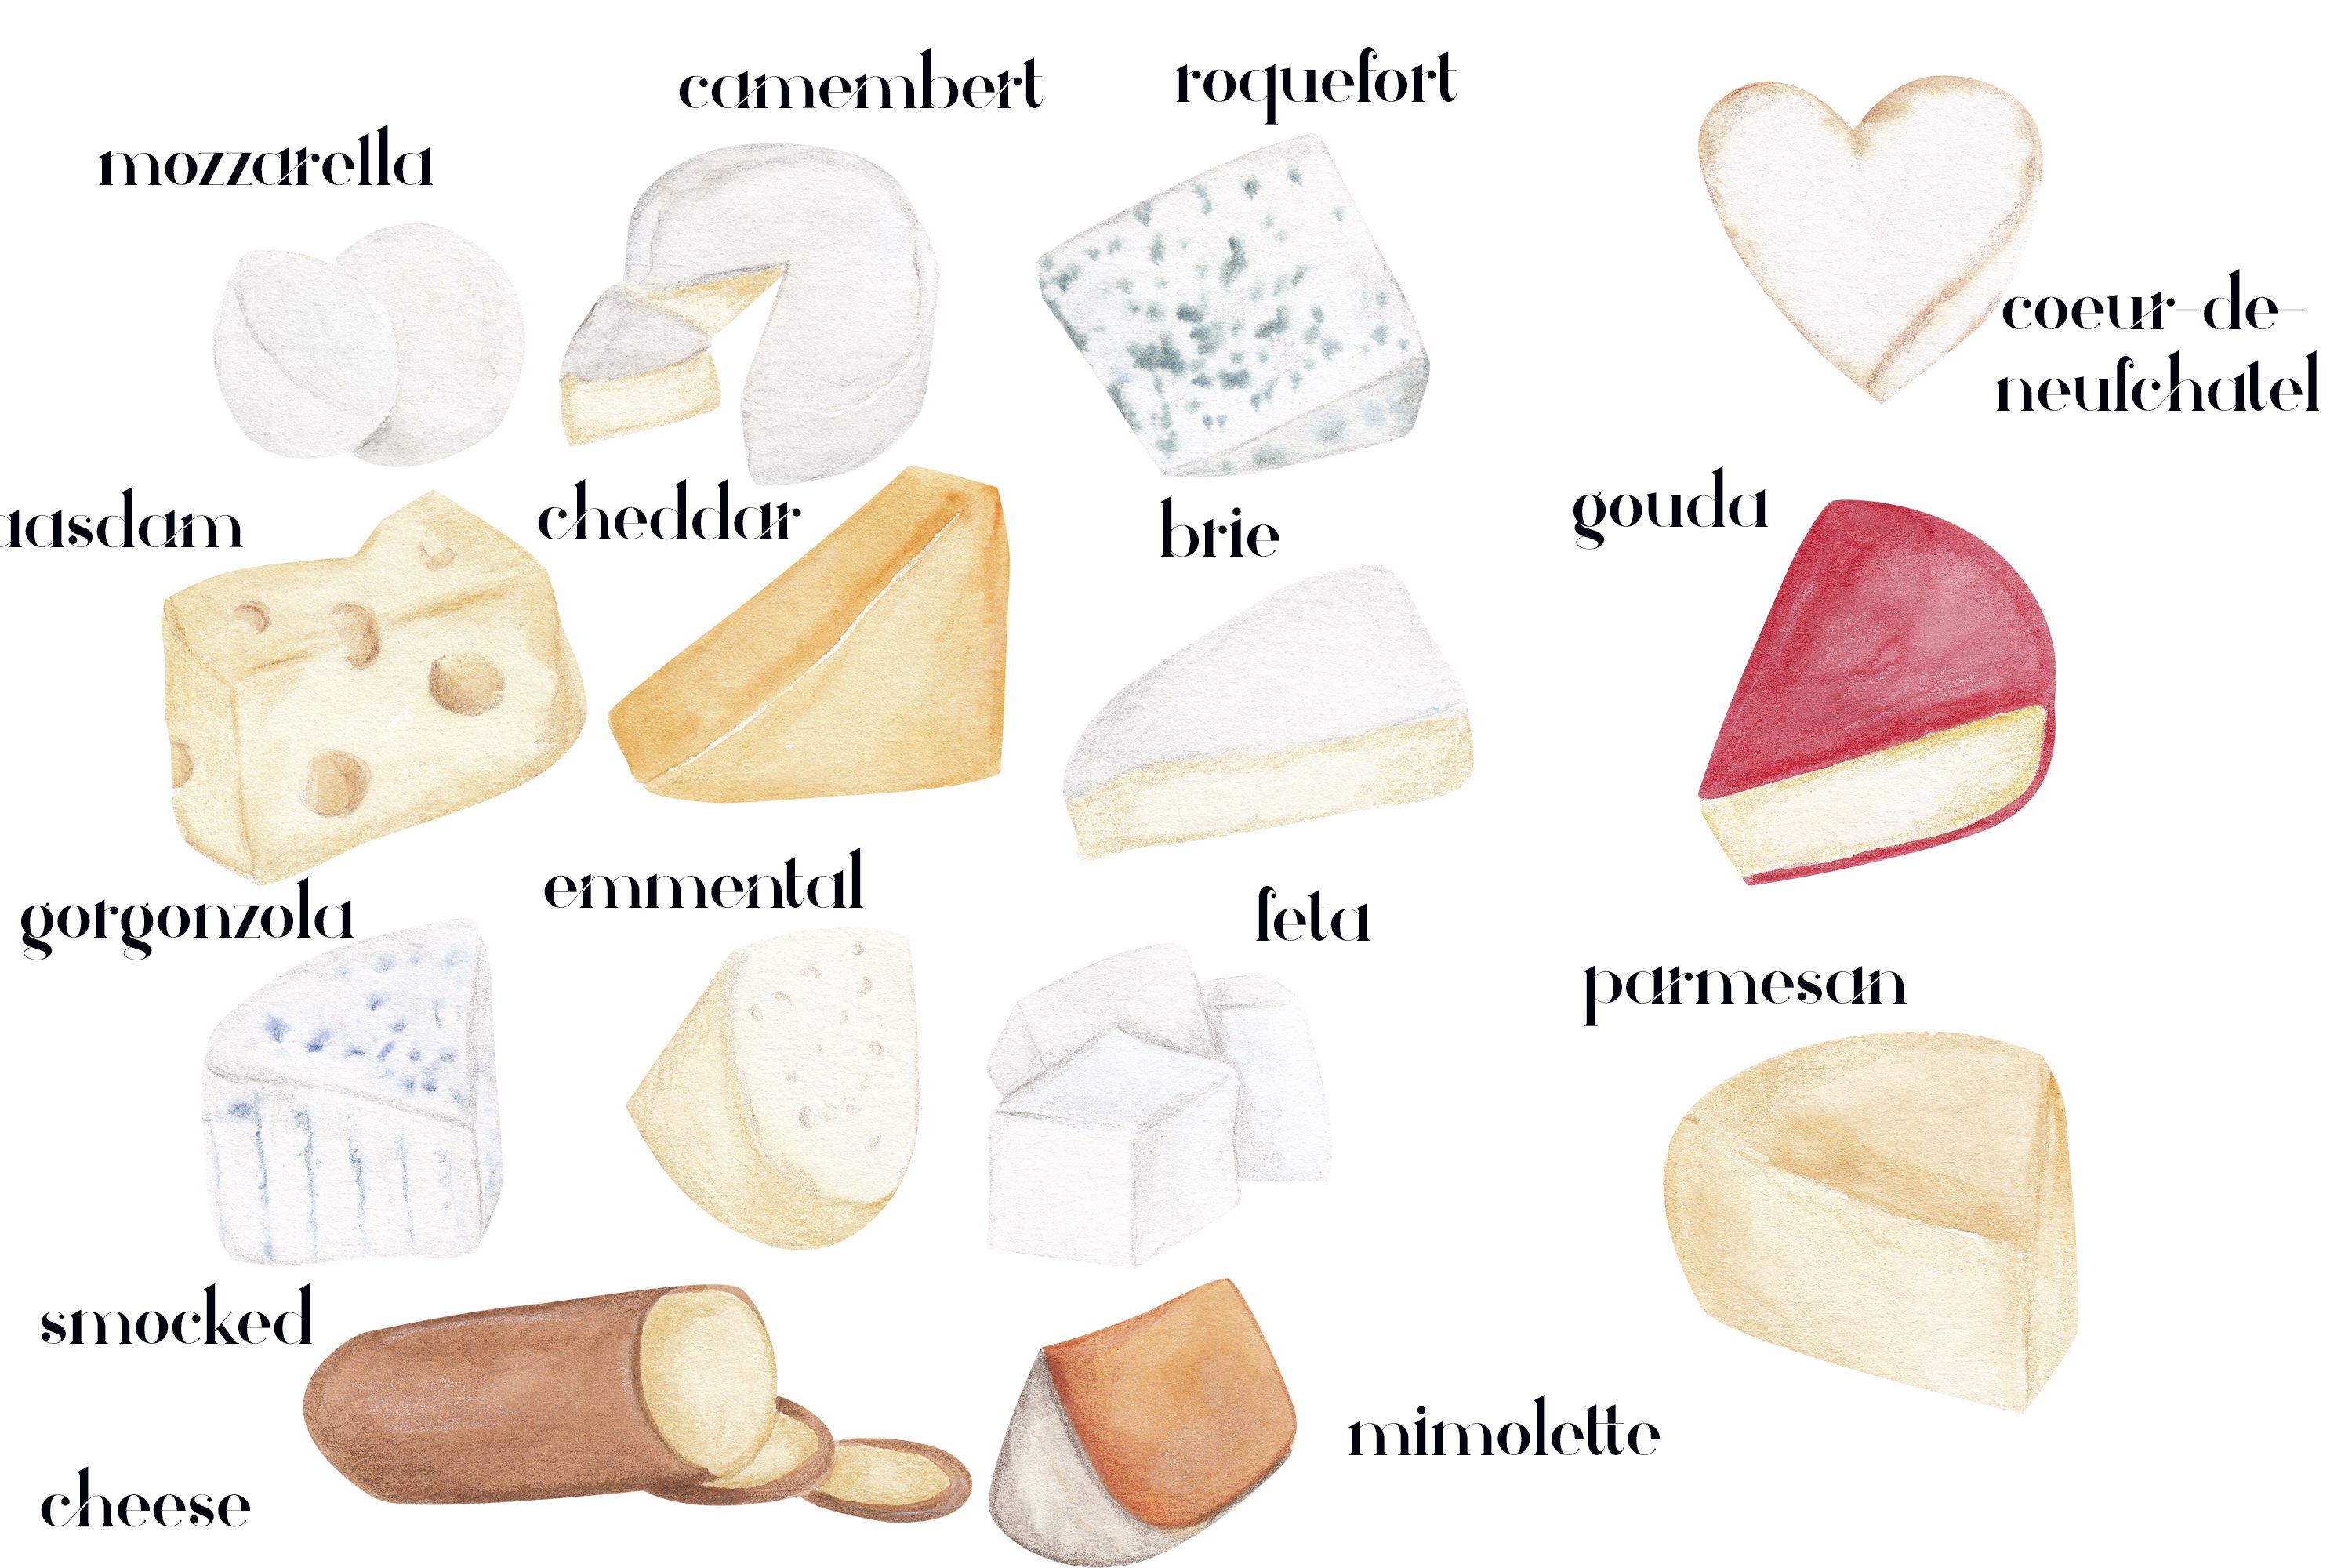 Gorgeous watercolor images of french cheeses.